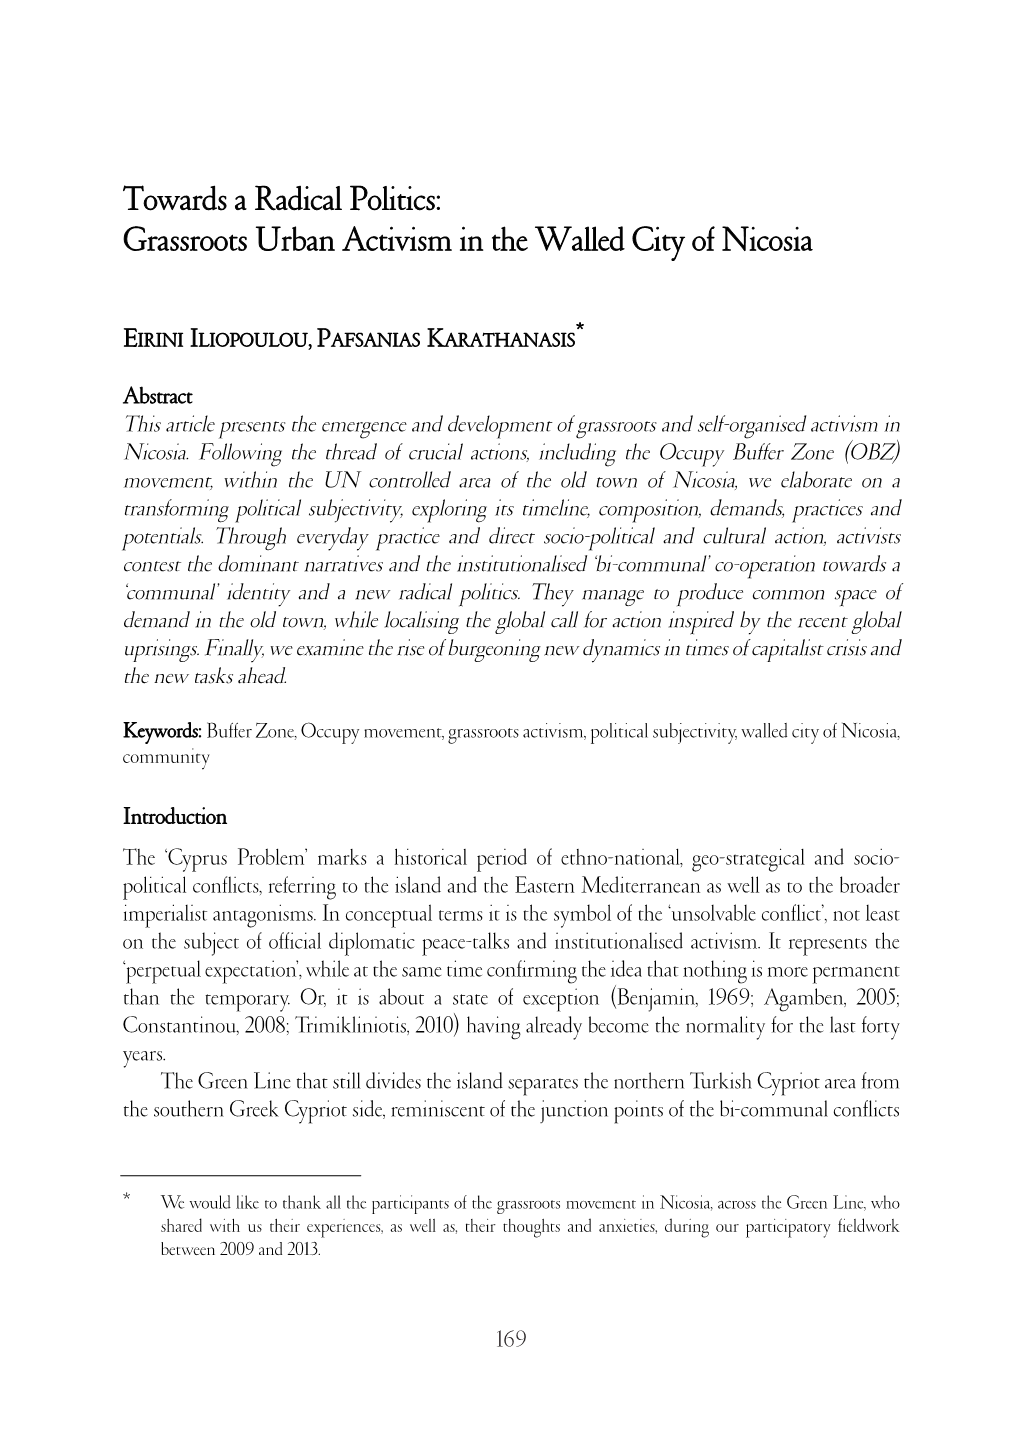 Towards a Radical Politics: Grassroots Urban Activism in the Walled City of Nicosia